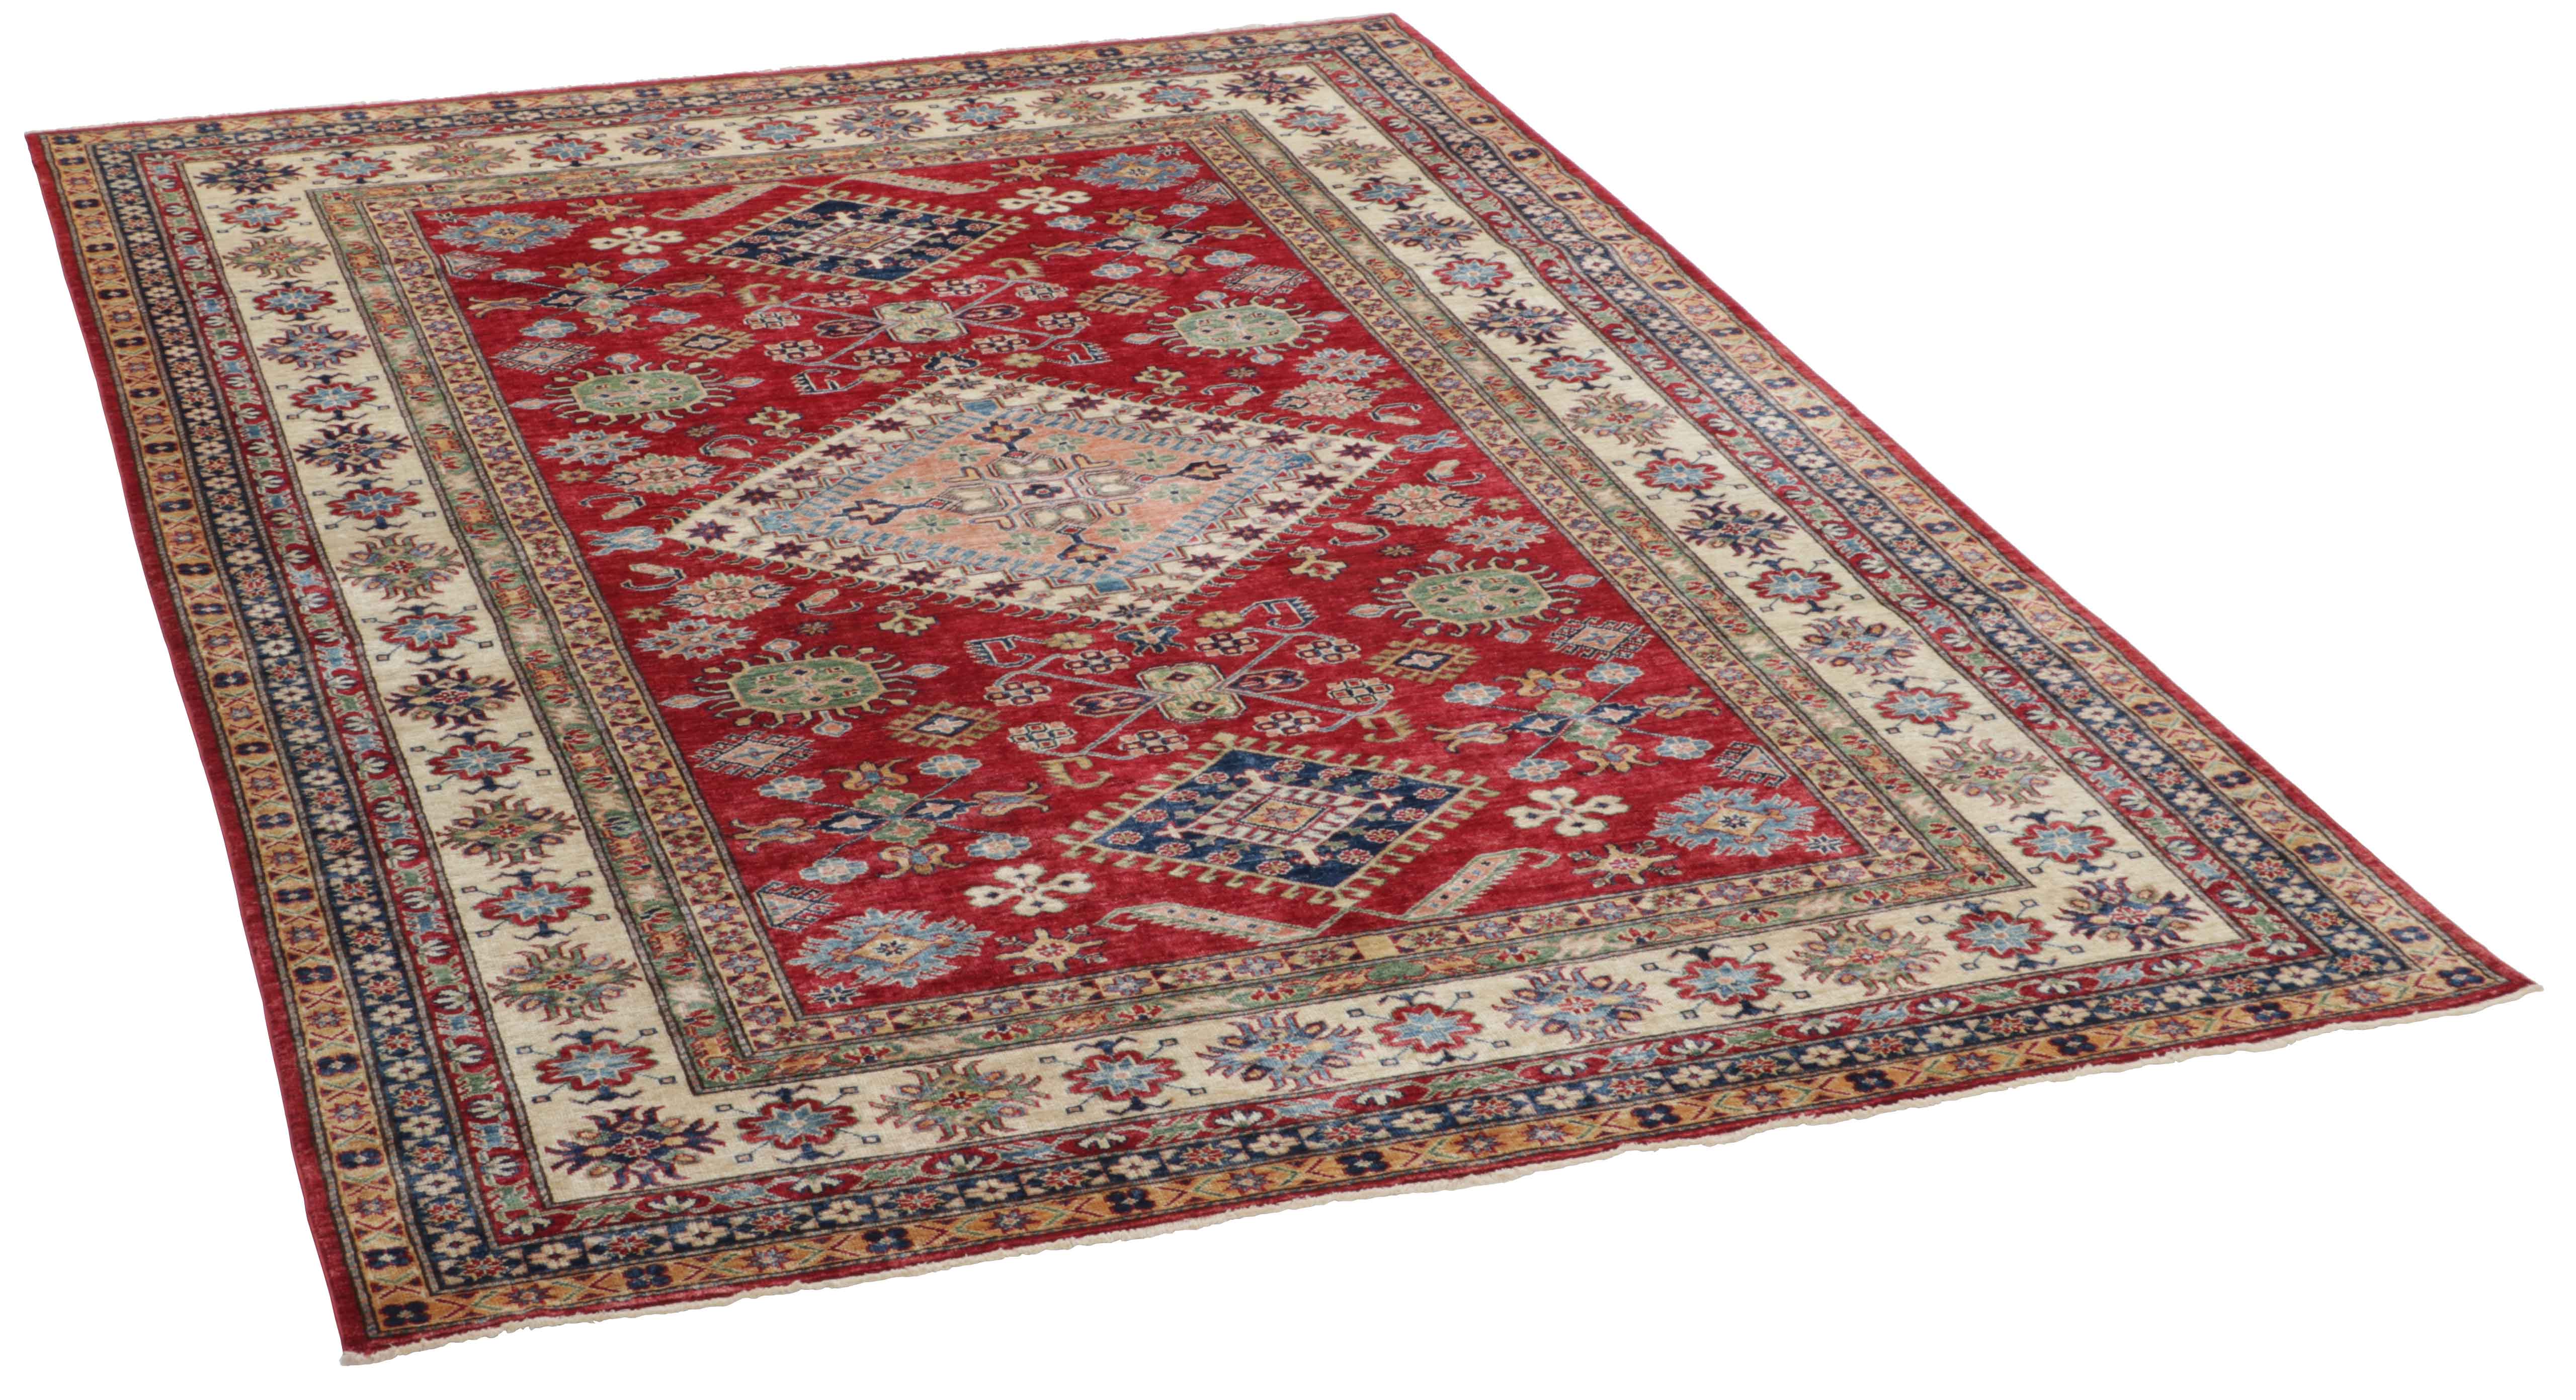 Authentic oriental rug with red and beige traditional geometric design